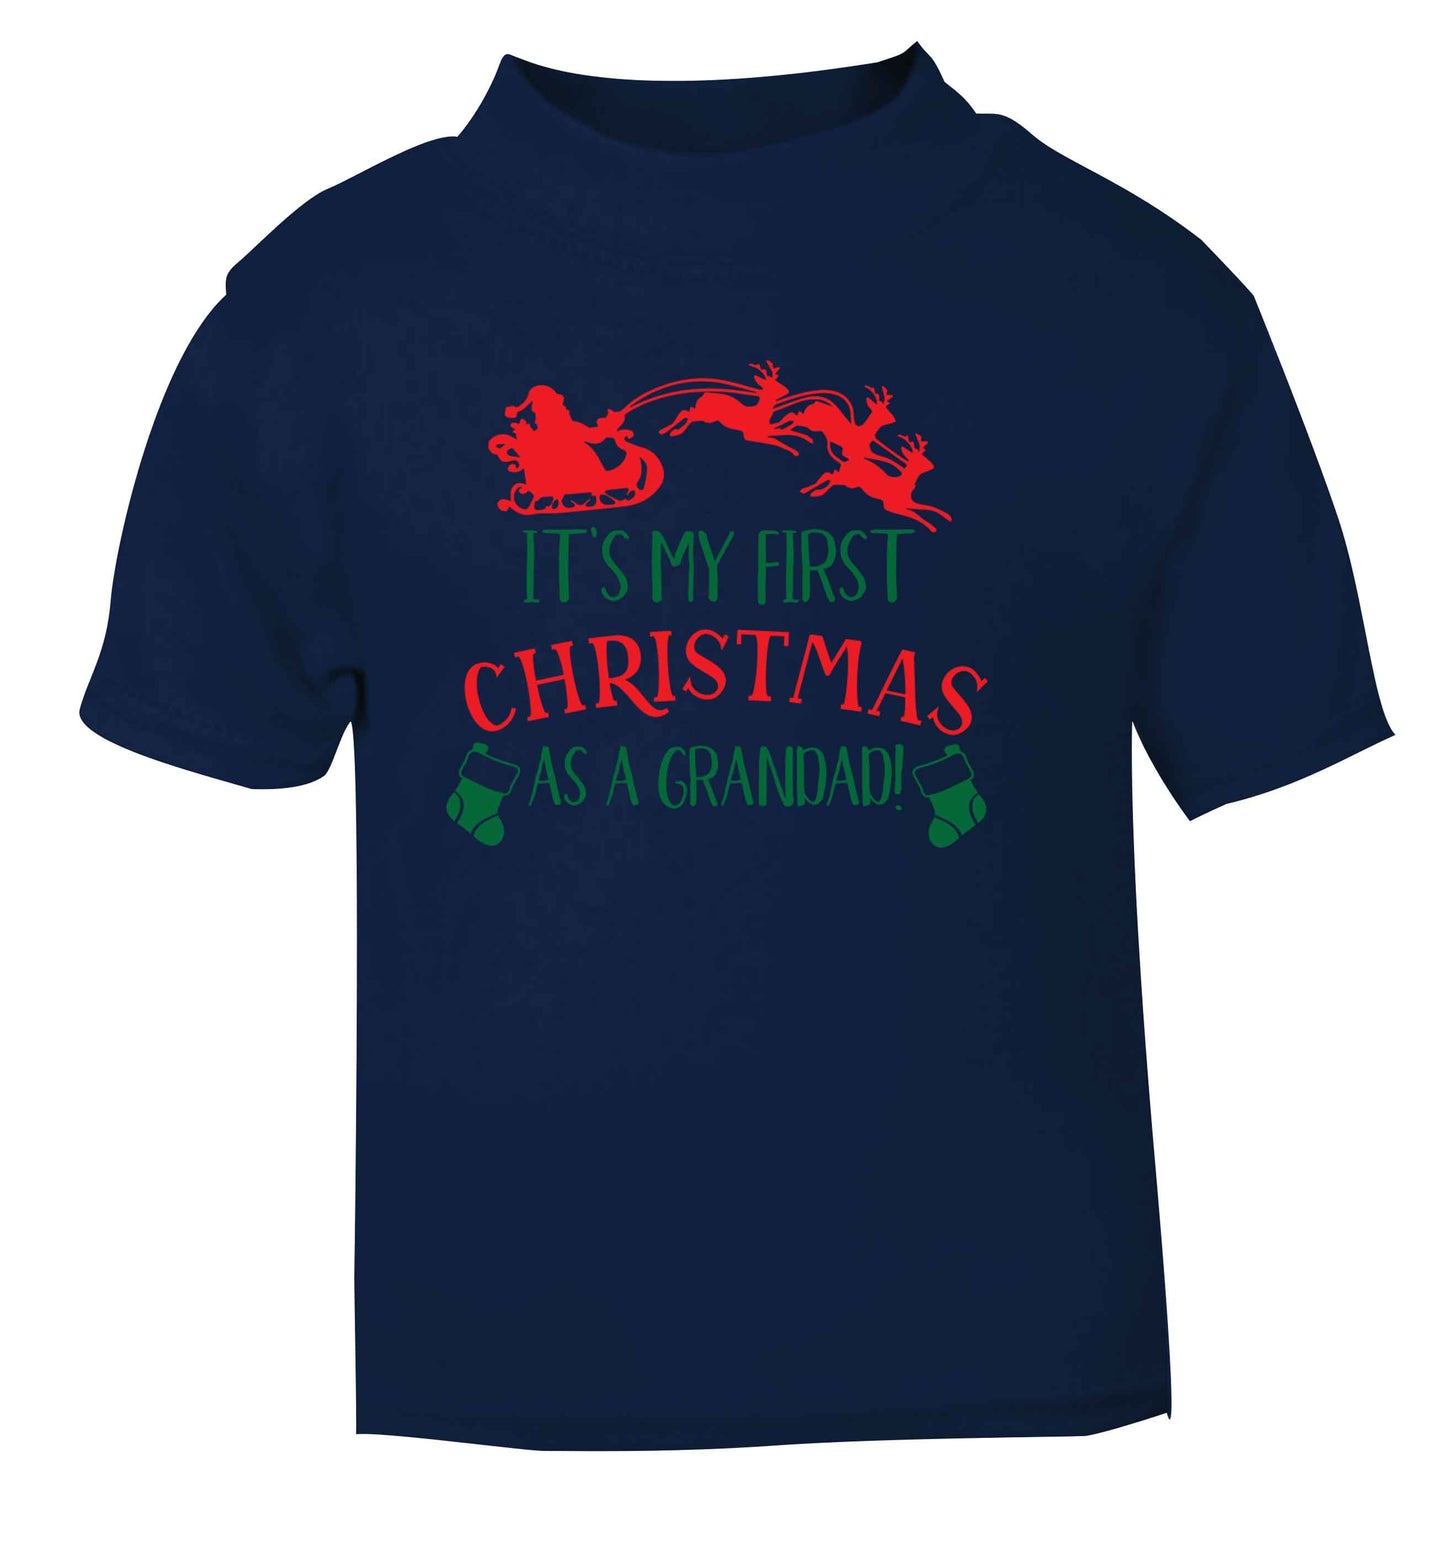 It's my first Christmas as a grandad! navy Baby Toddler Tshirt 2 Years